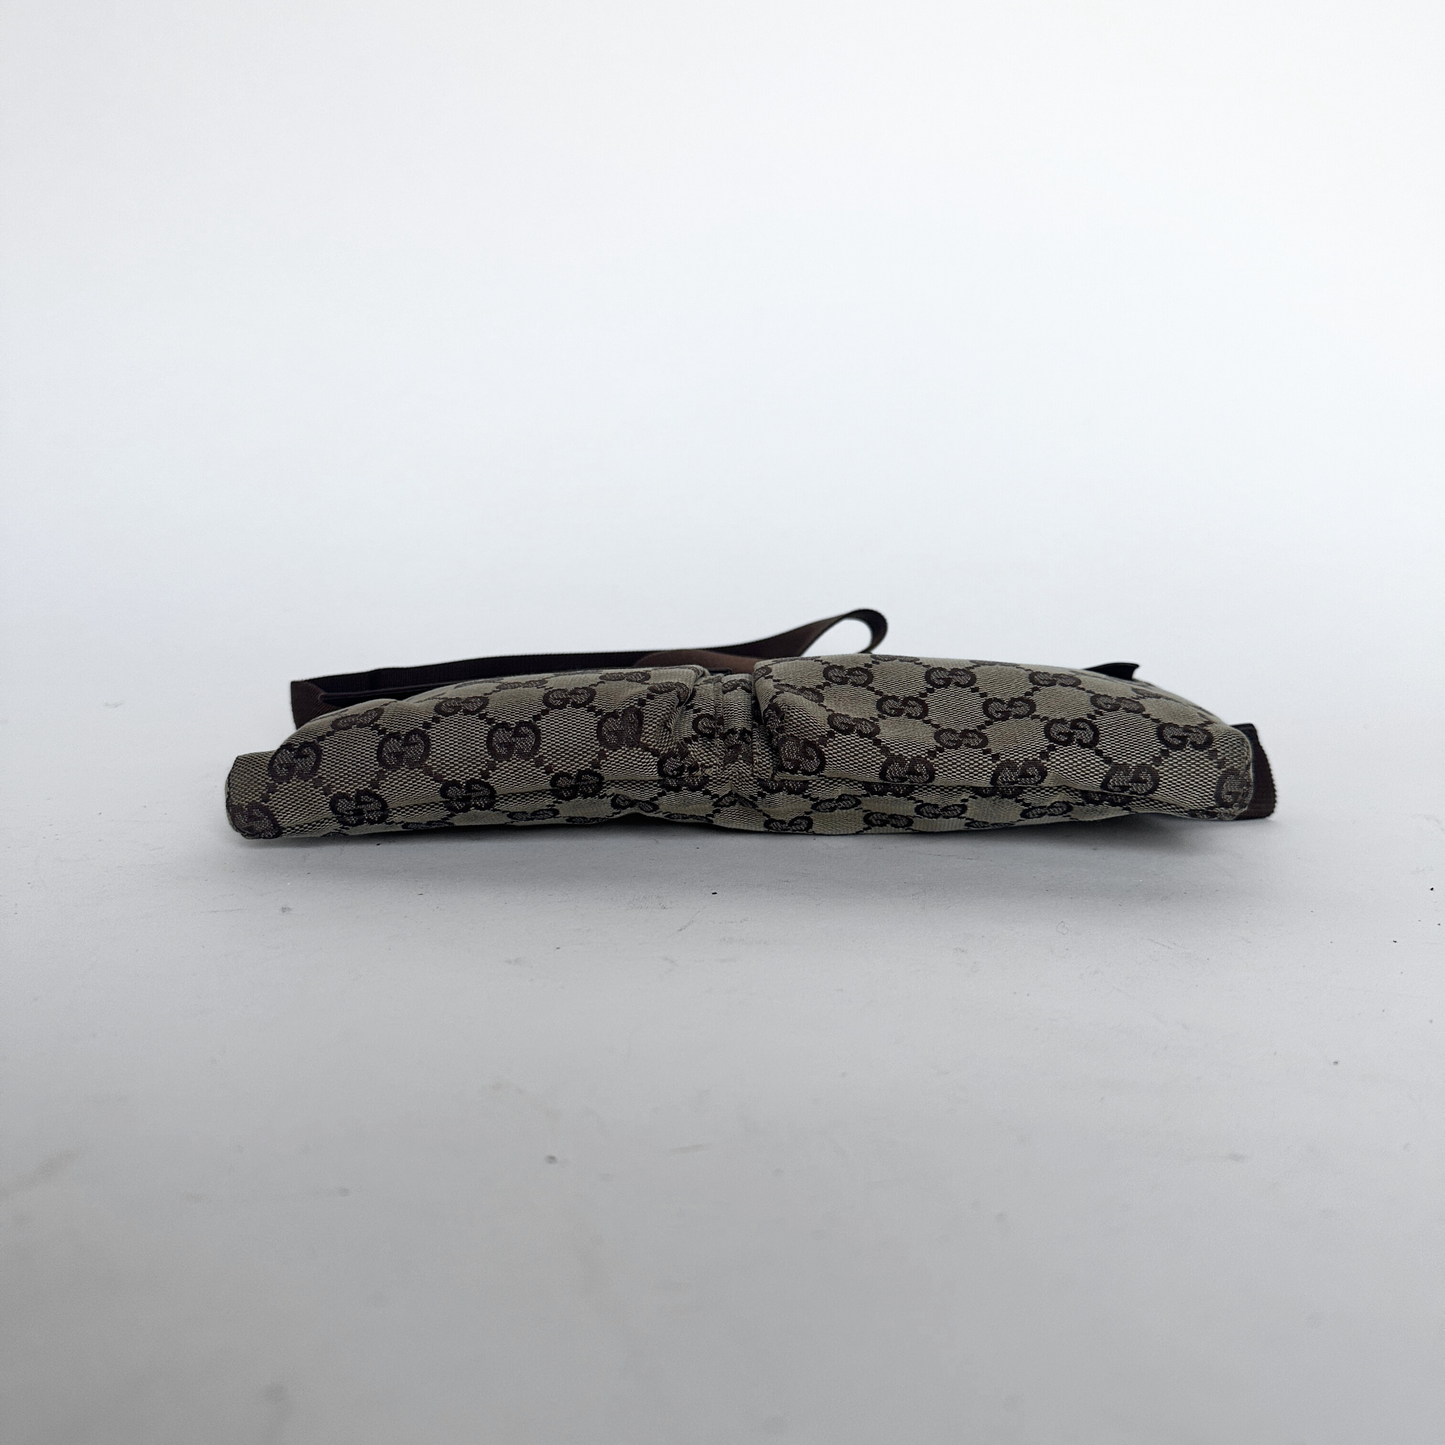 Gucci Gucci Fanny Pack in Monogram Canvas - Crossbody bags - Etoile Luxury Vintage